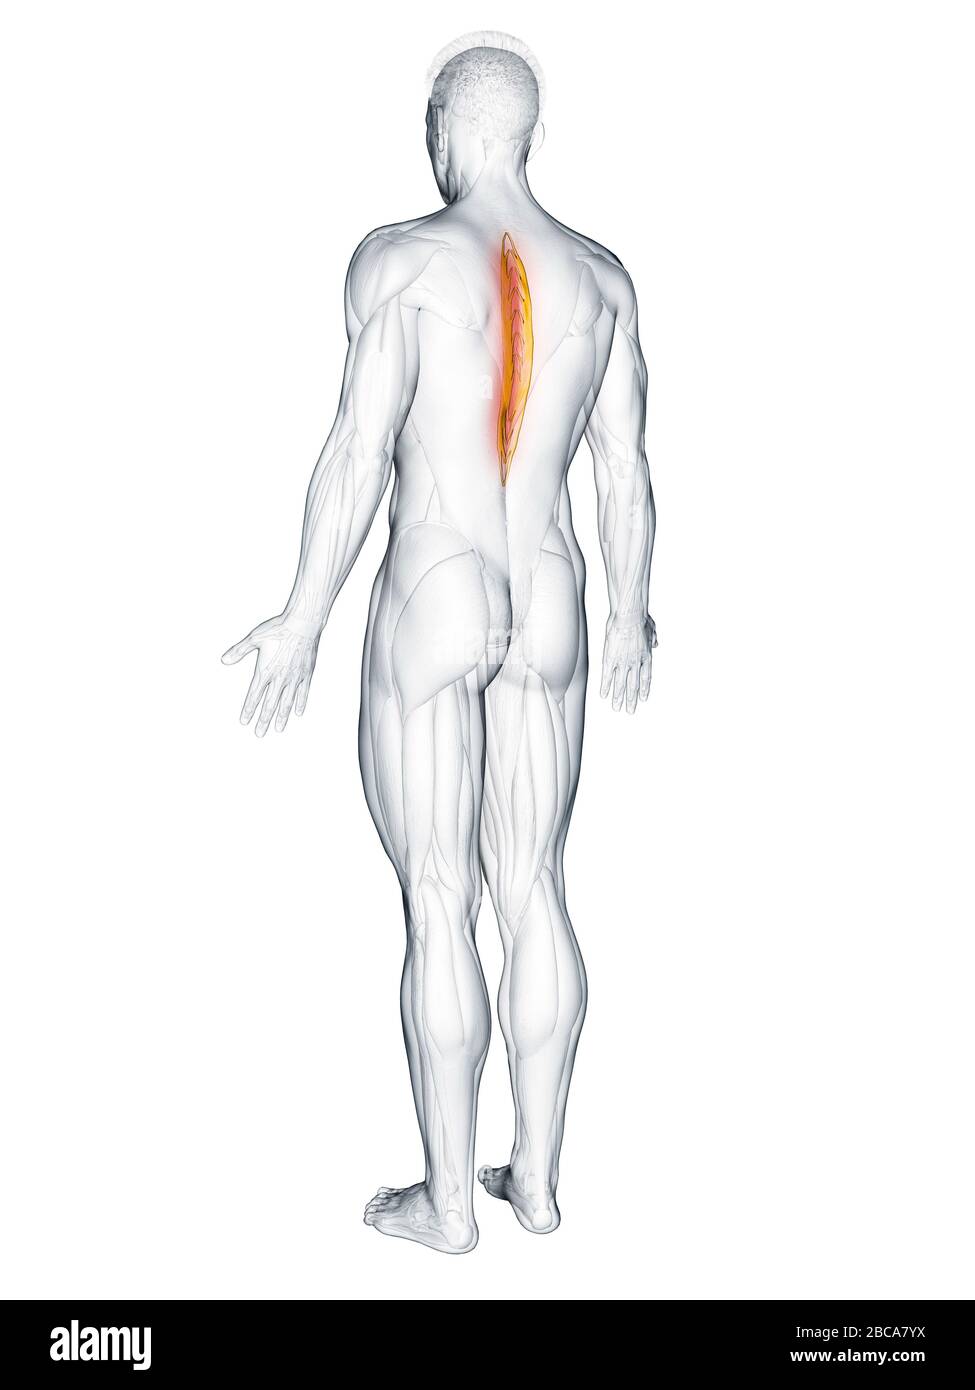 Spinalis thoracis muscle, illustration. Stock Photo